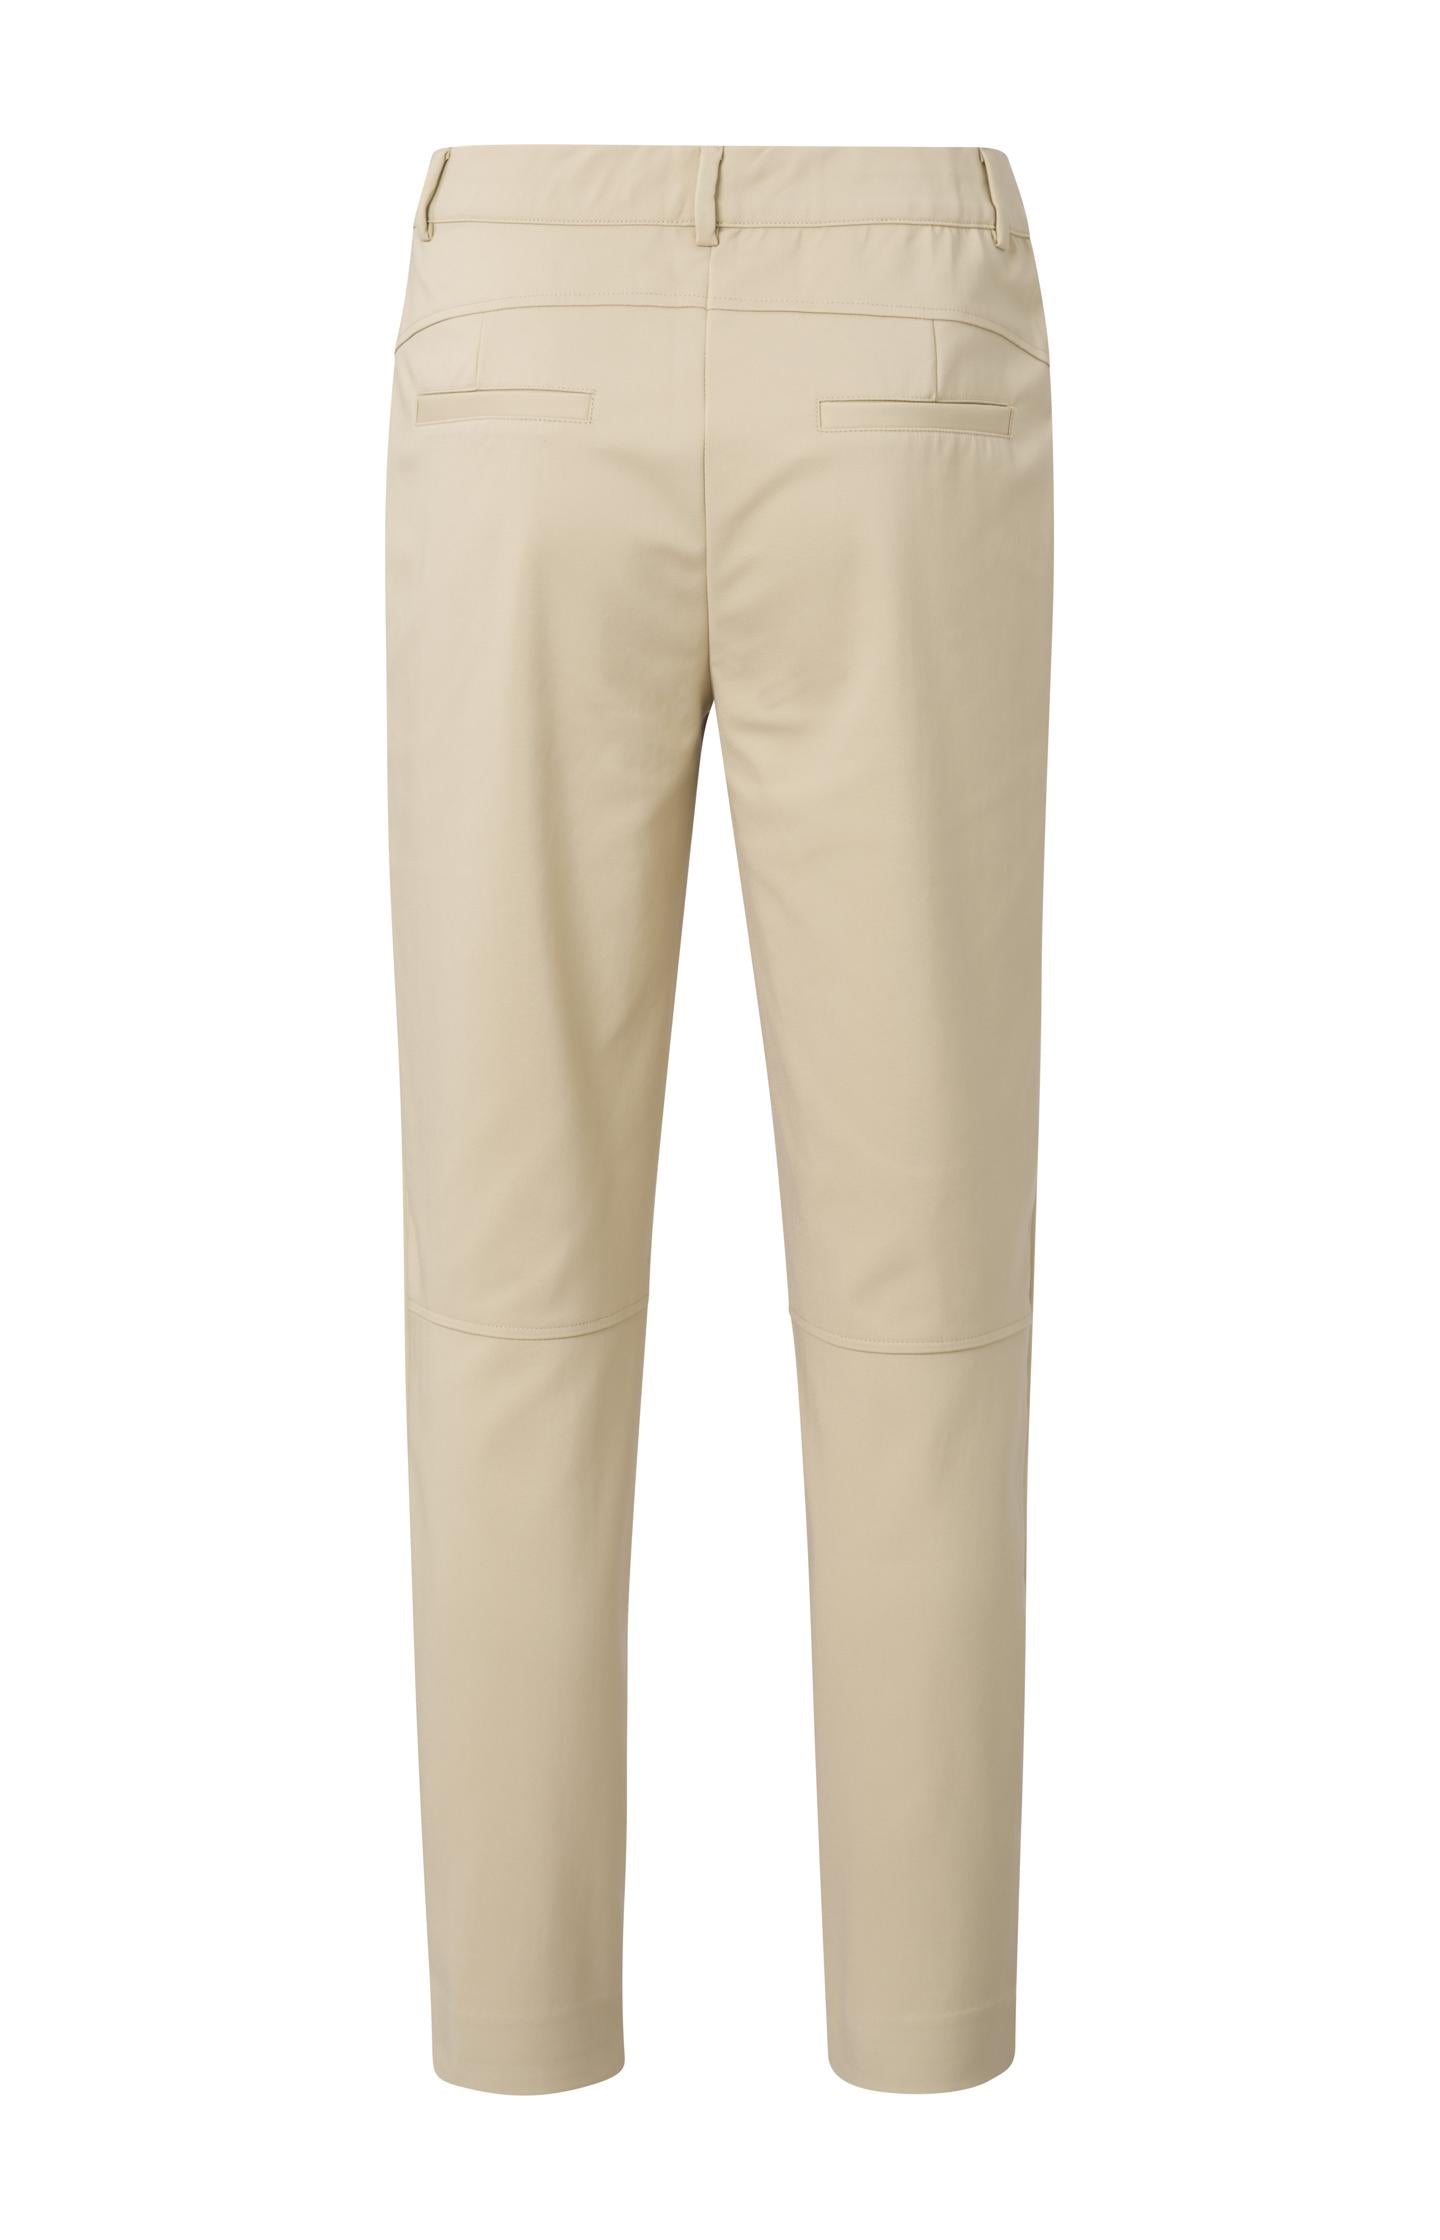 Trousers with straight leg, pockets and zip fly in slim fit